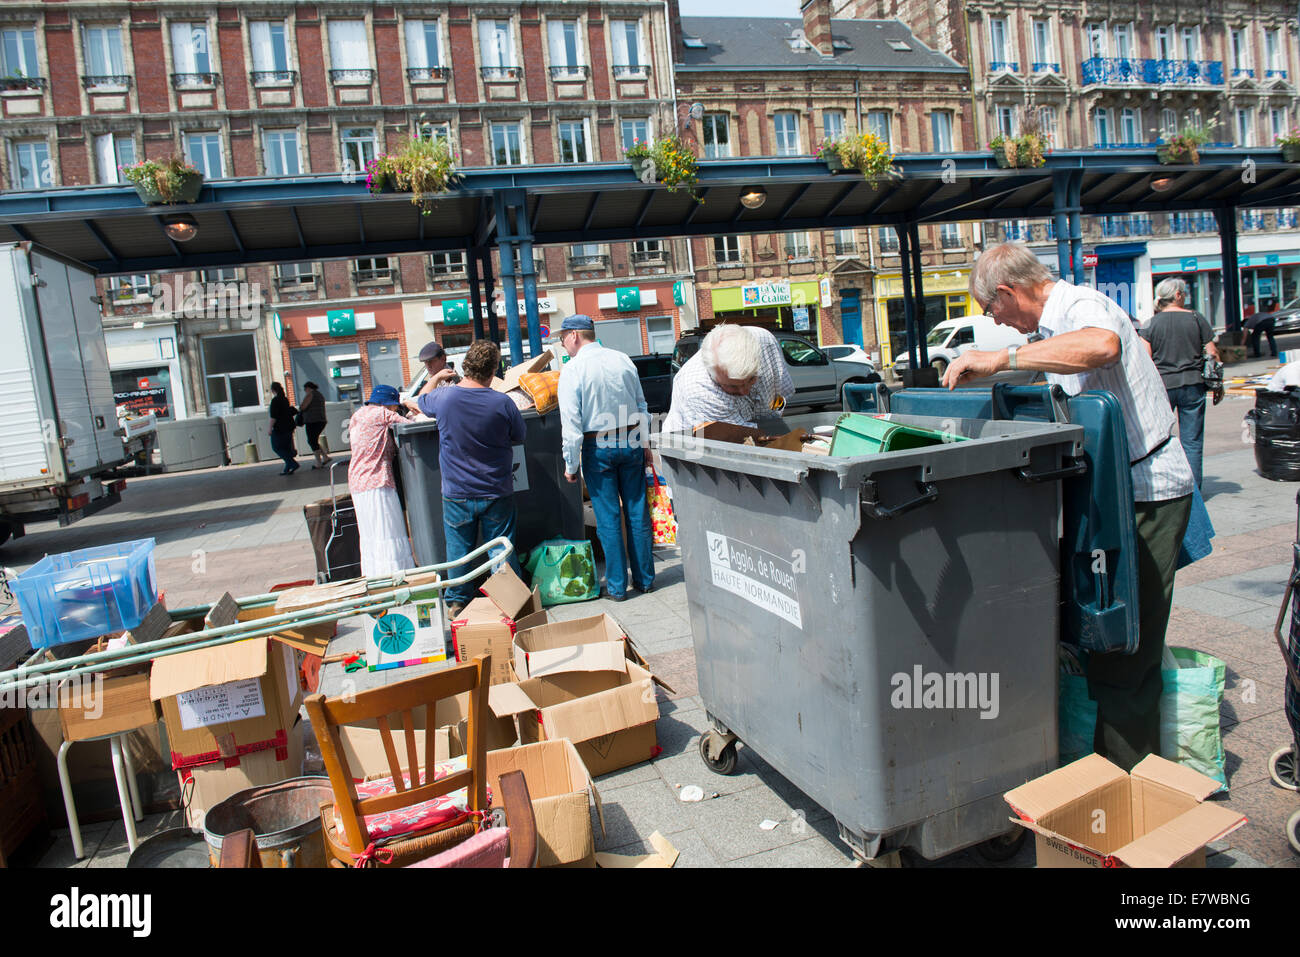 People looking through bins at a market in Rouen, France Europe Stock Photo